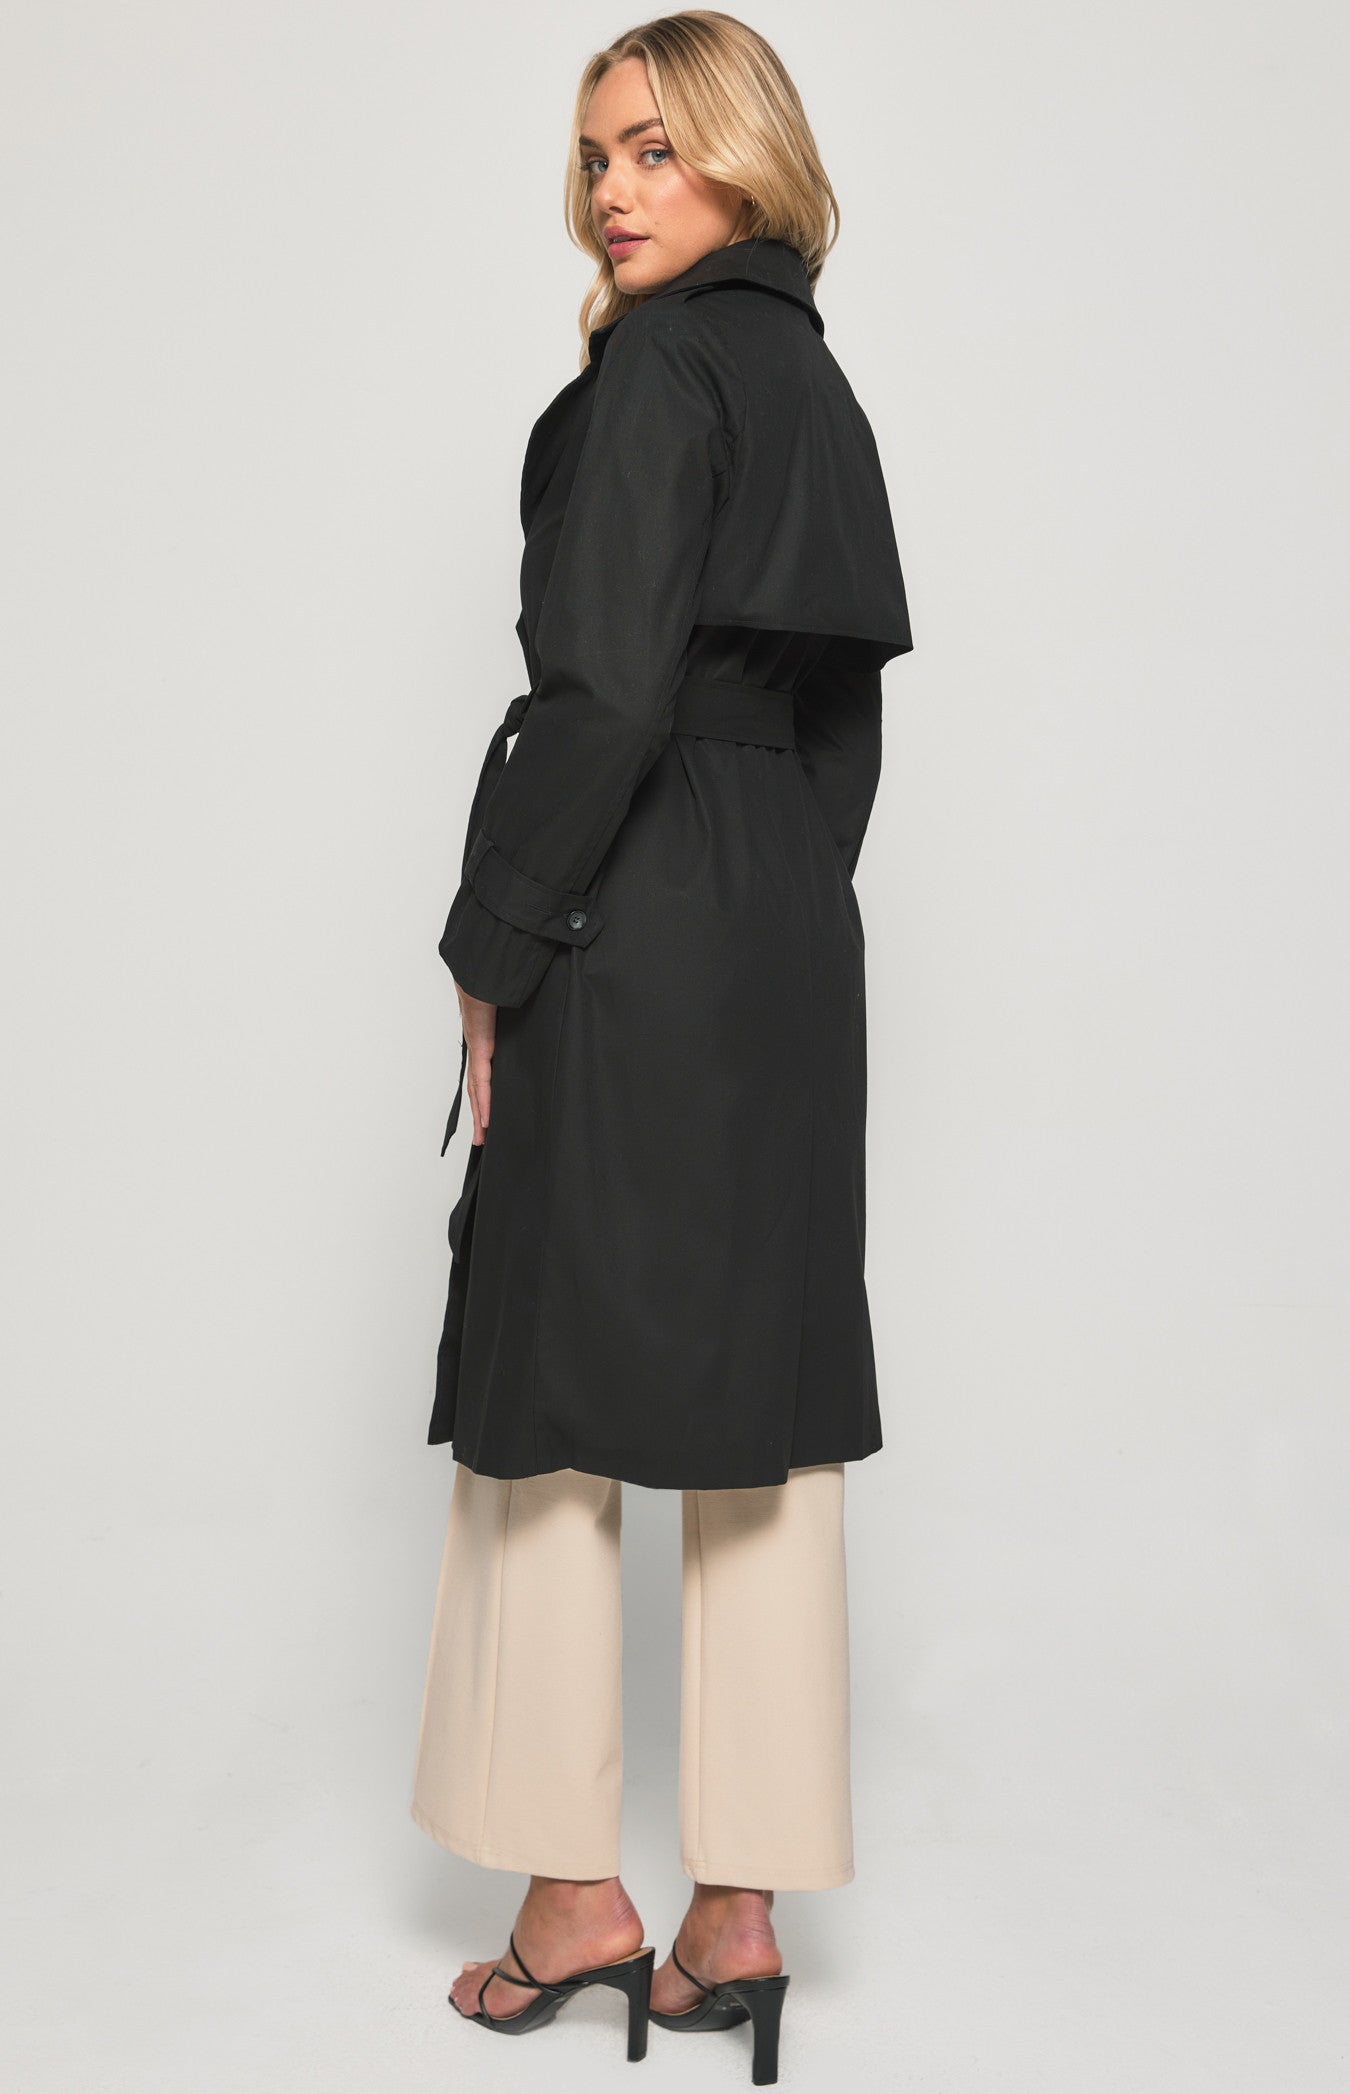 Stay stylish with our black trench coat – the perfect blend of elegance and practicality. Ideal for any occasion